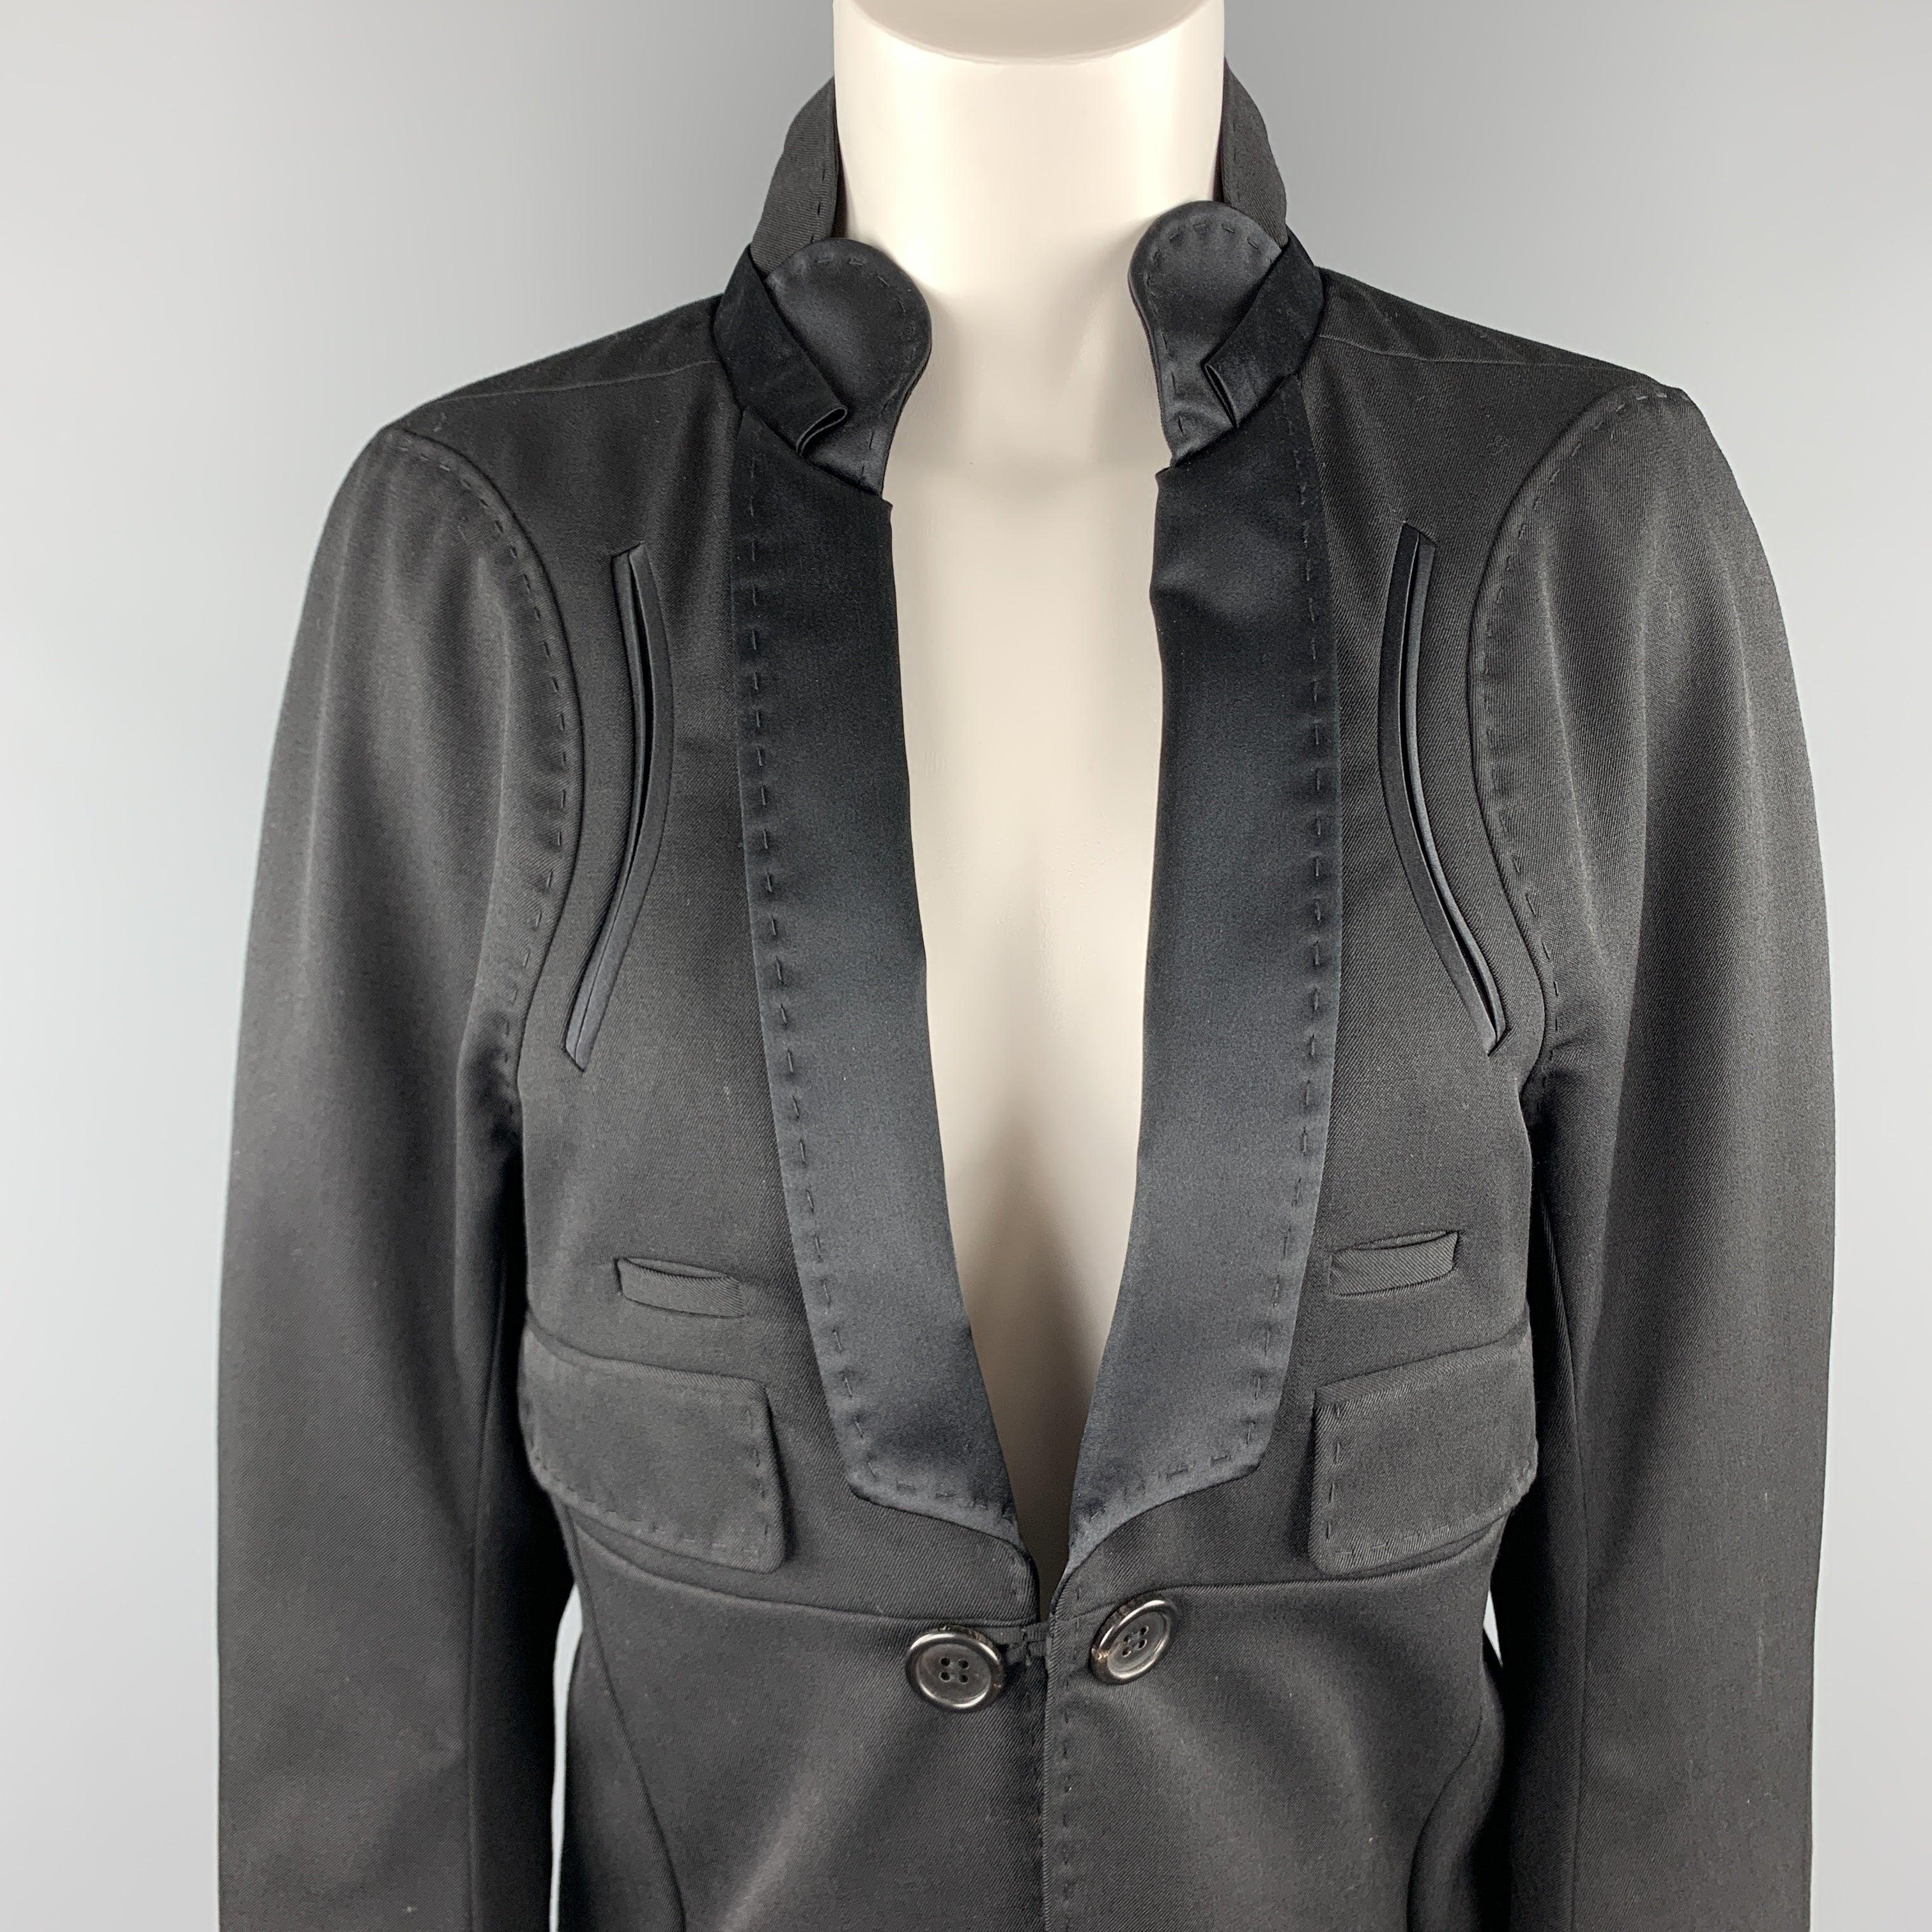 UNDERCOVER tuxedo style coat comes in black wool with a single button front, high back collar with satin shawl lapel, pocket details, and coat tail style hem line. Made in Japan.Excellent
Pre-Owned Condition. 

Marked:  JP 3 

Measurements: 
